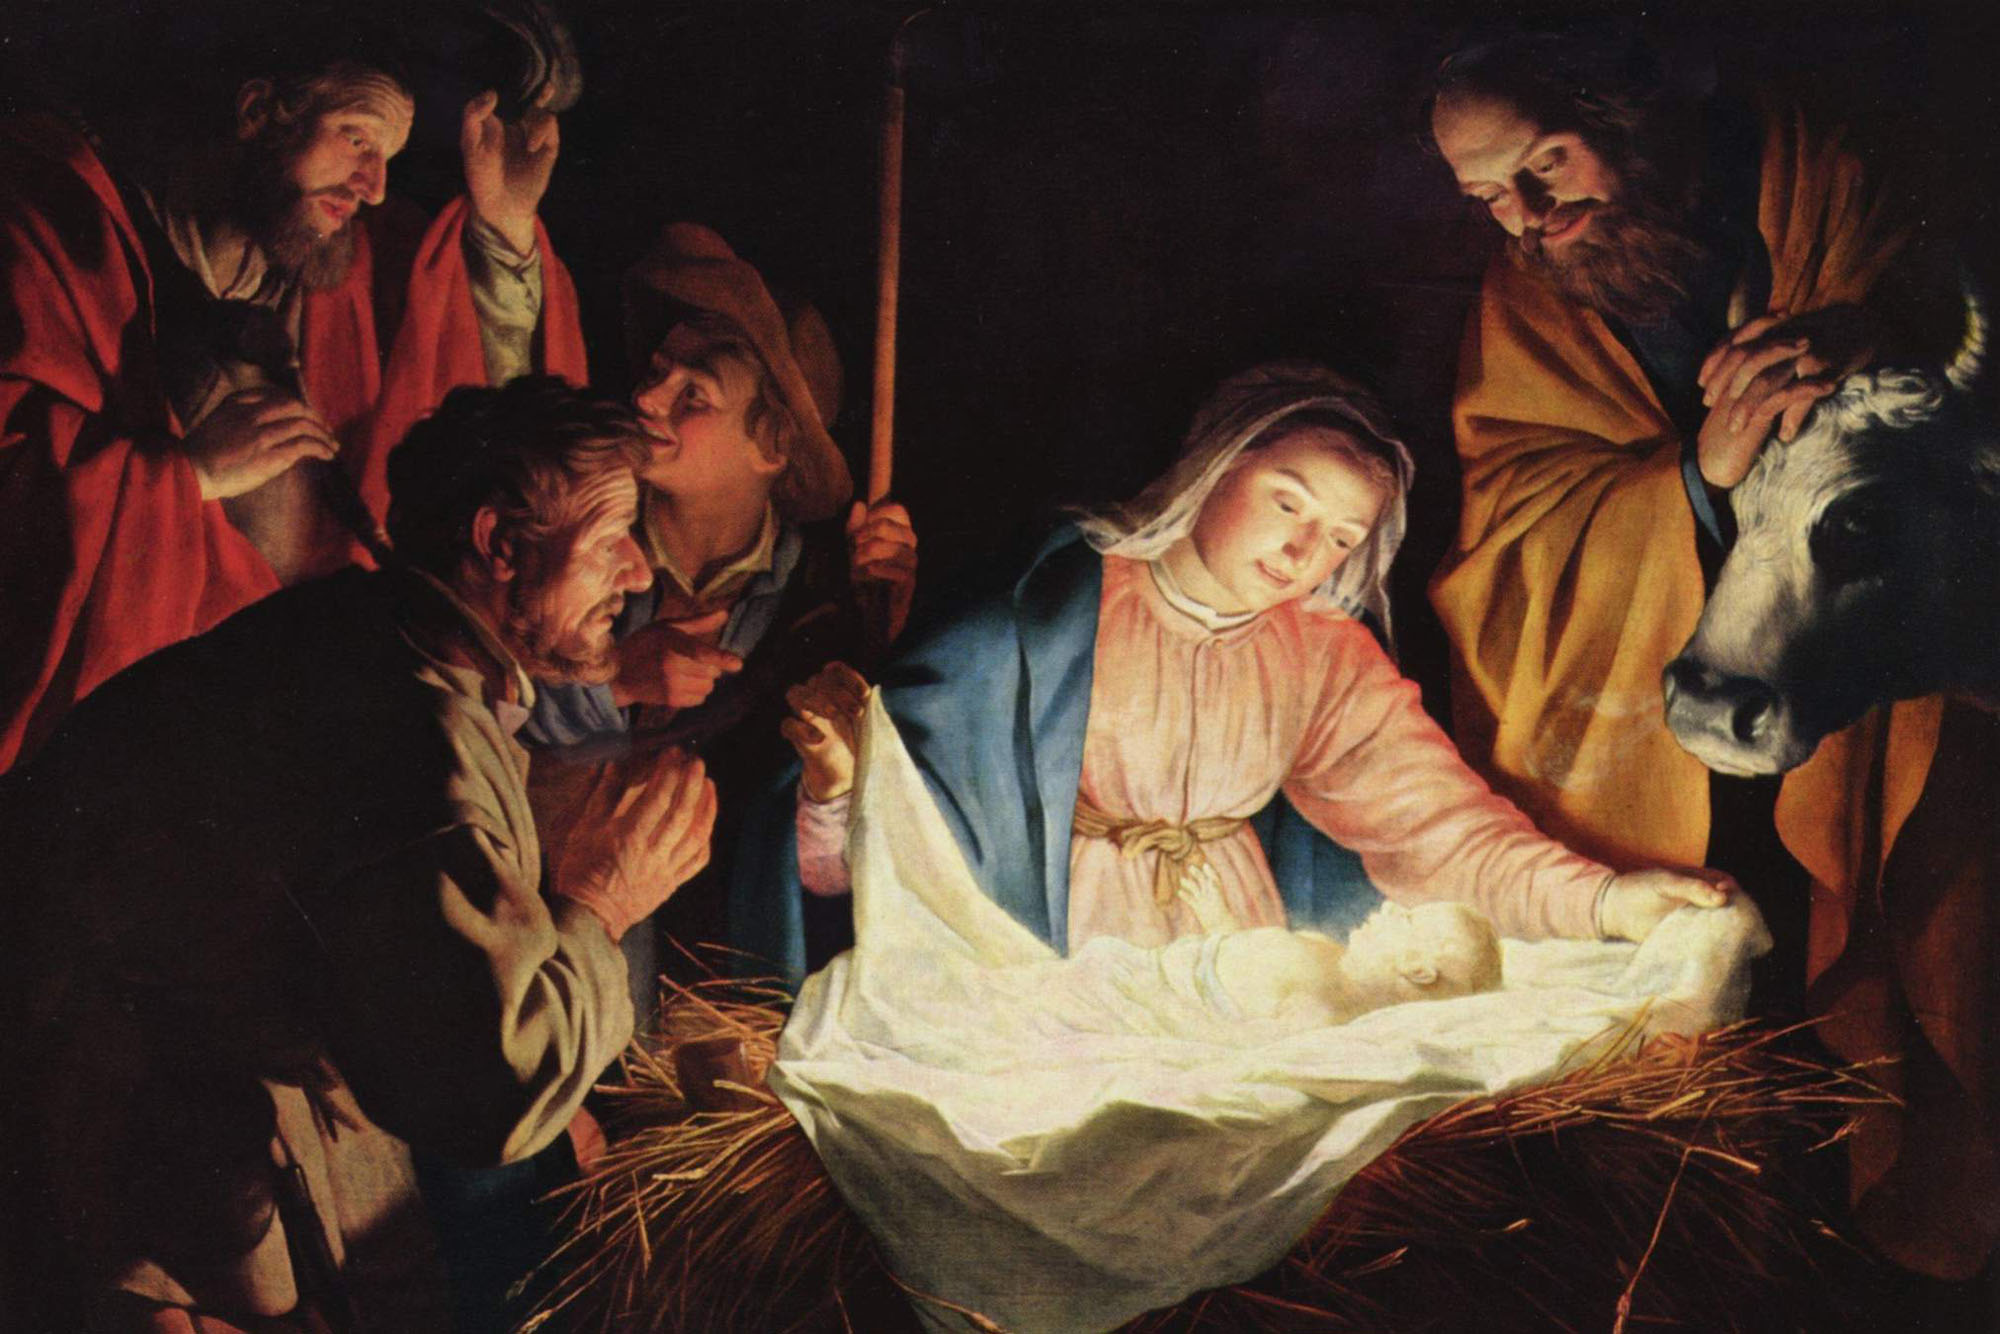 "The Adoration of the Shepherds" by Gerard van Honthorts, 1622